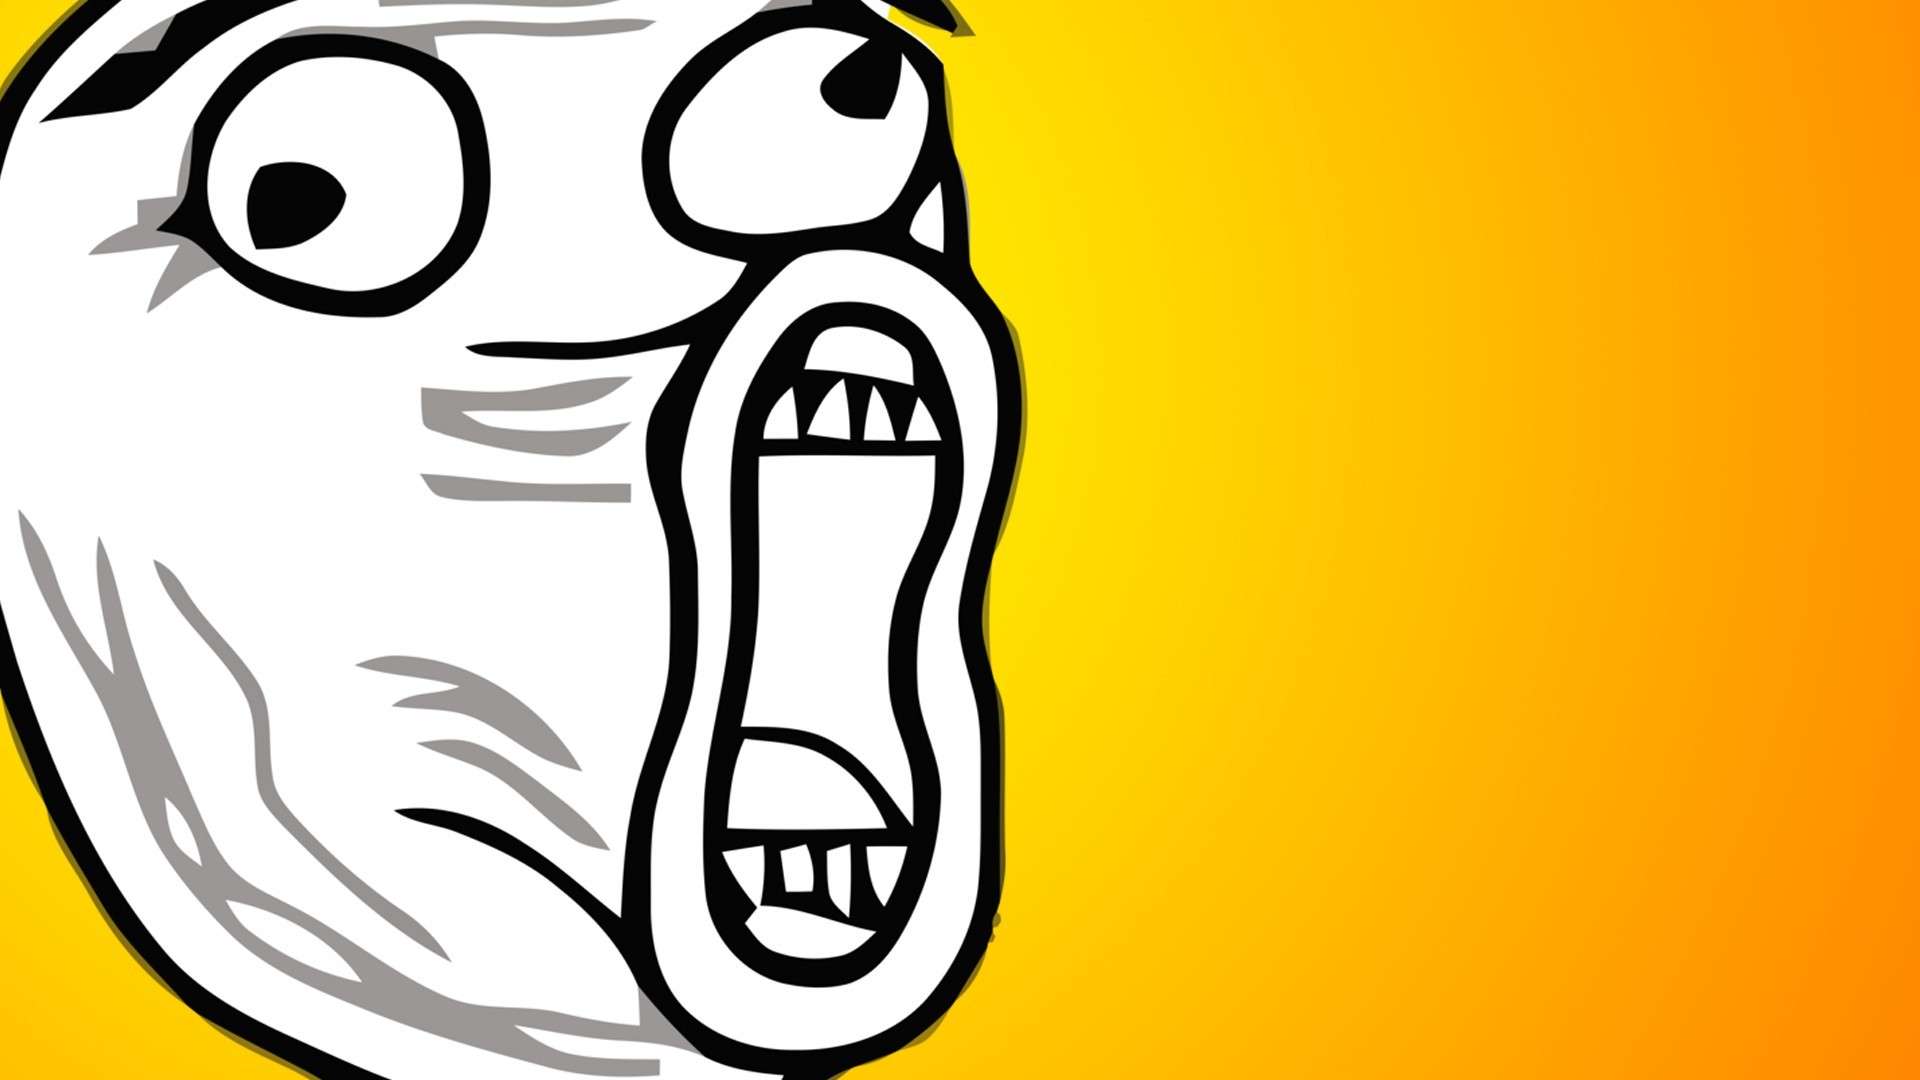 General 1920x1080 troll face cartoon simple background gradient yellow background